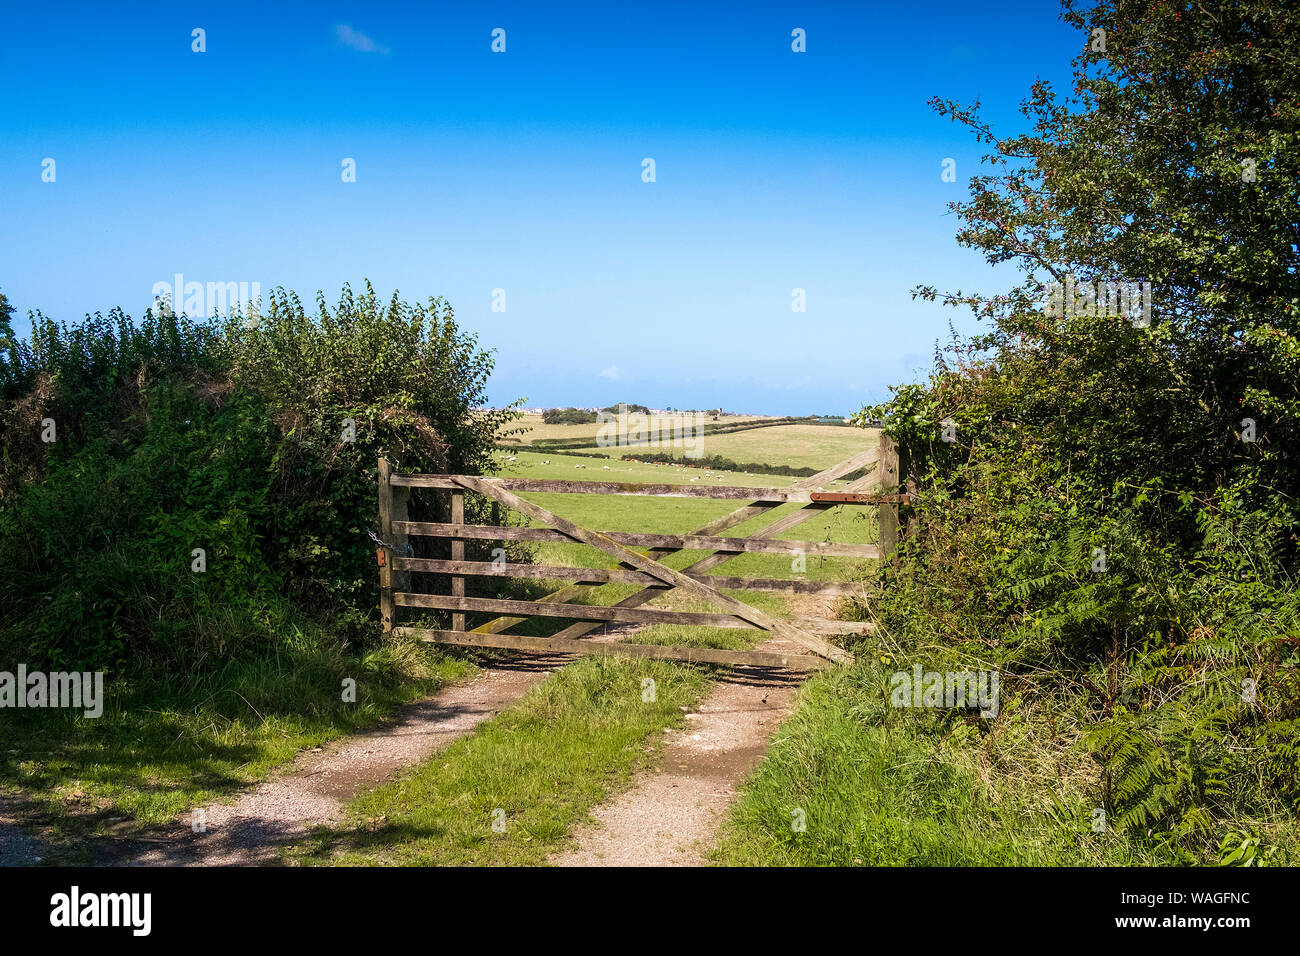 A rustic wooden five bar gate in a field in the Cornish countryside. Stock Photo